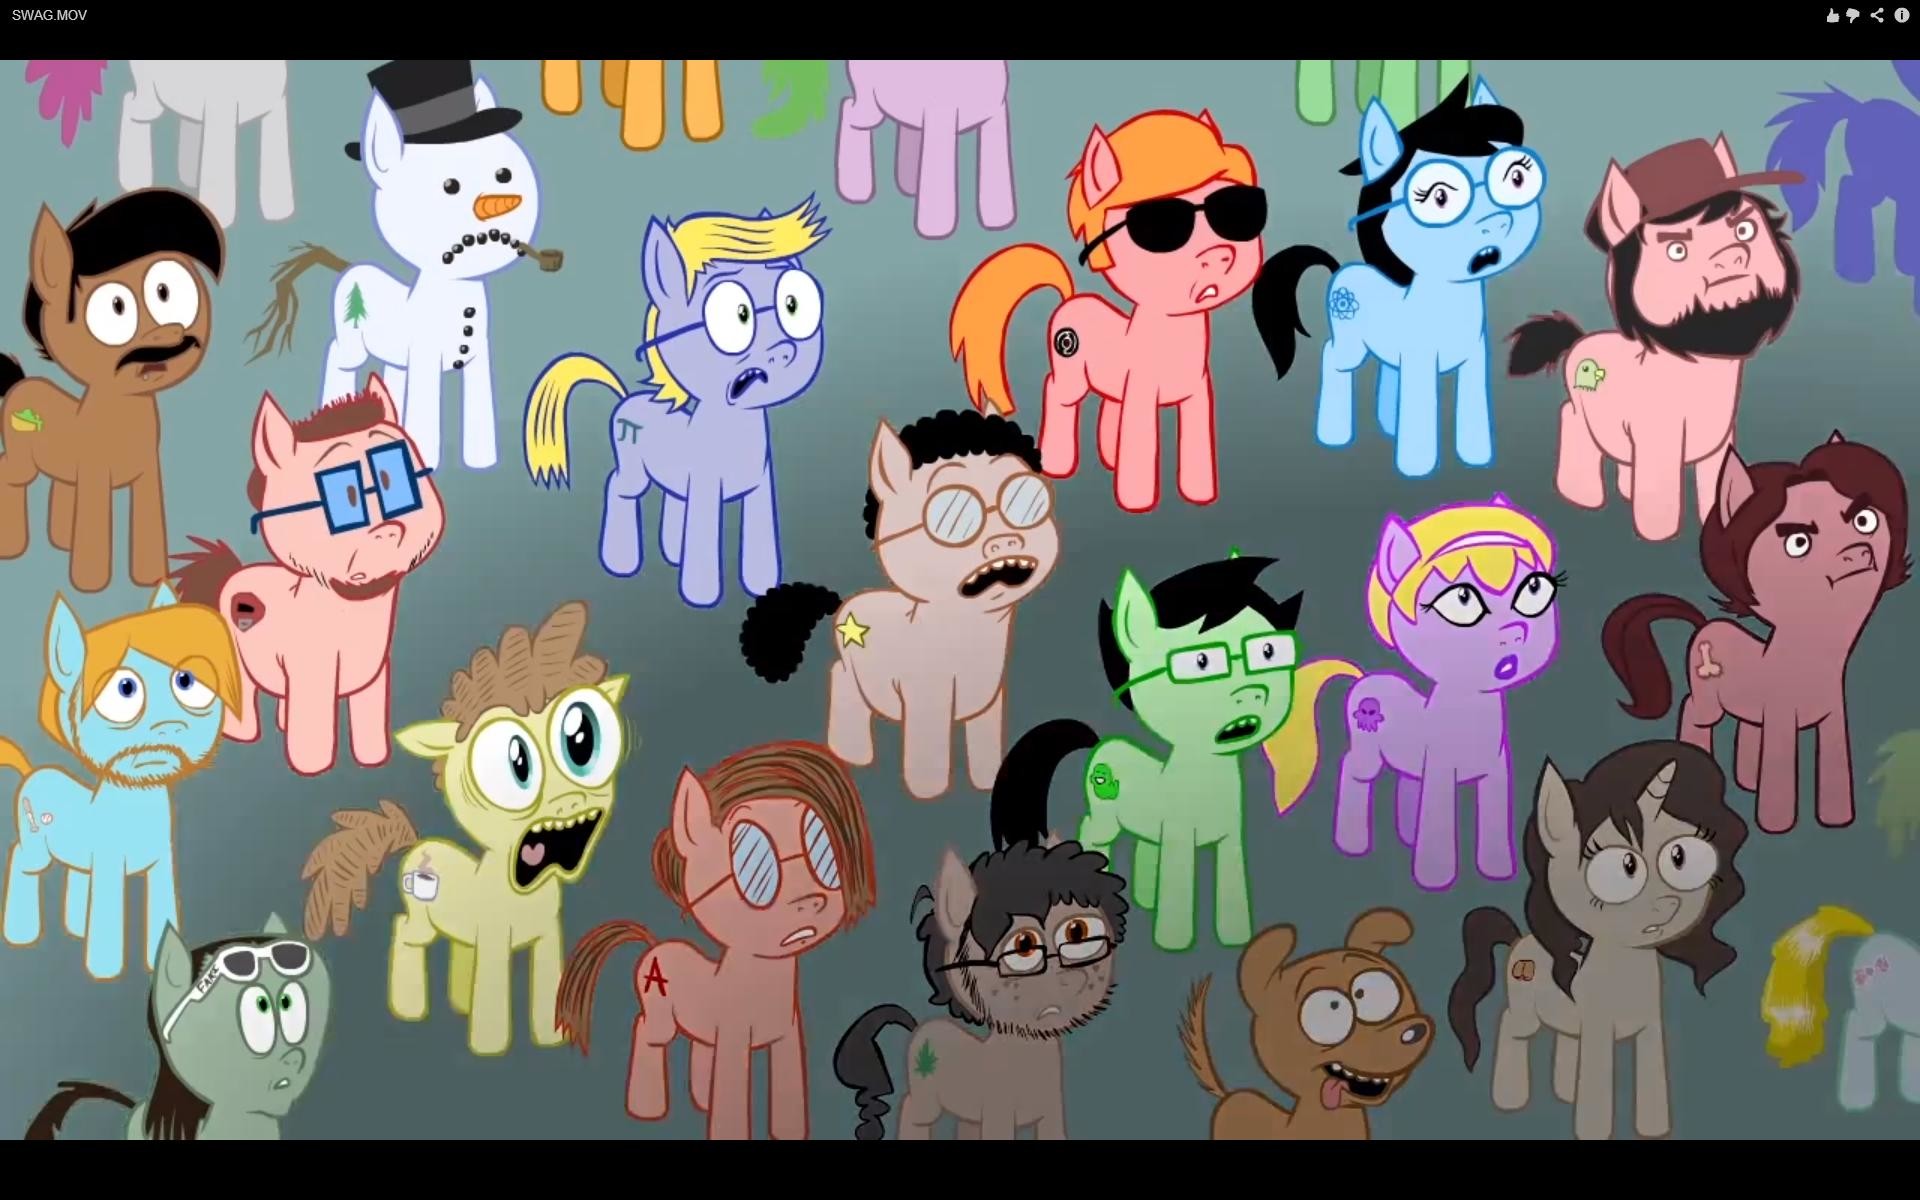 1920x1200 Beta kids as ponies in newest My Little Pony SWAG.